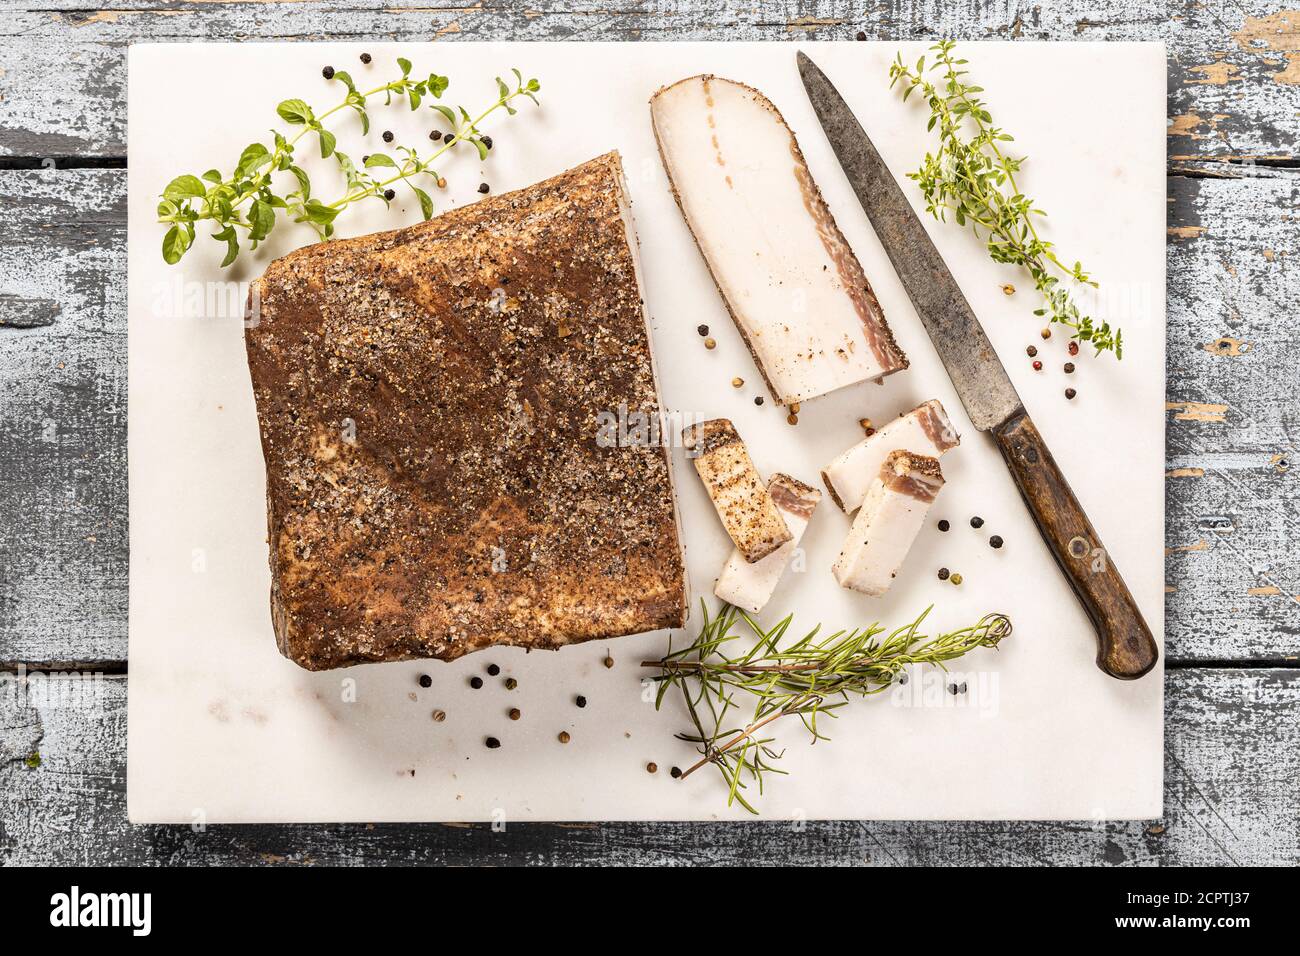 The Tuscan hamlet of Colonnata is a type of salumi made by curing strips of fatback with rosemary and other herbs and spices. Stock Photo